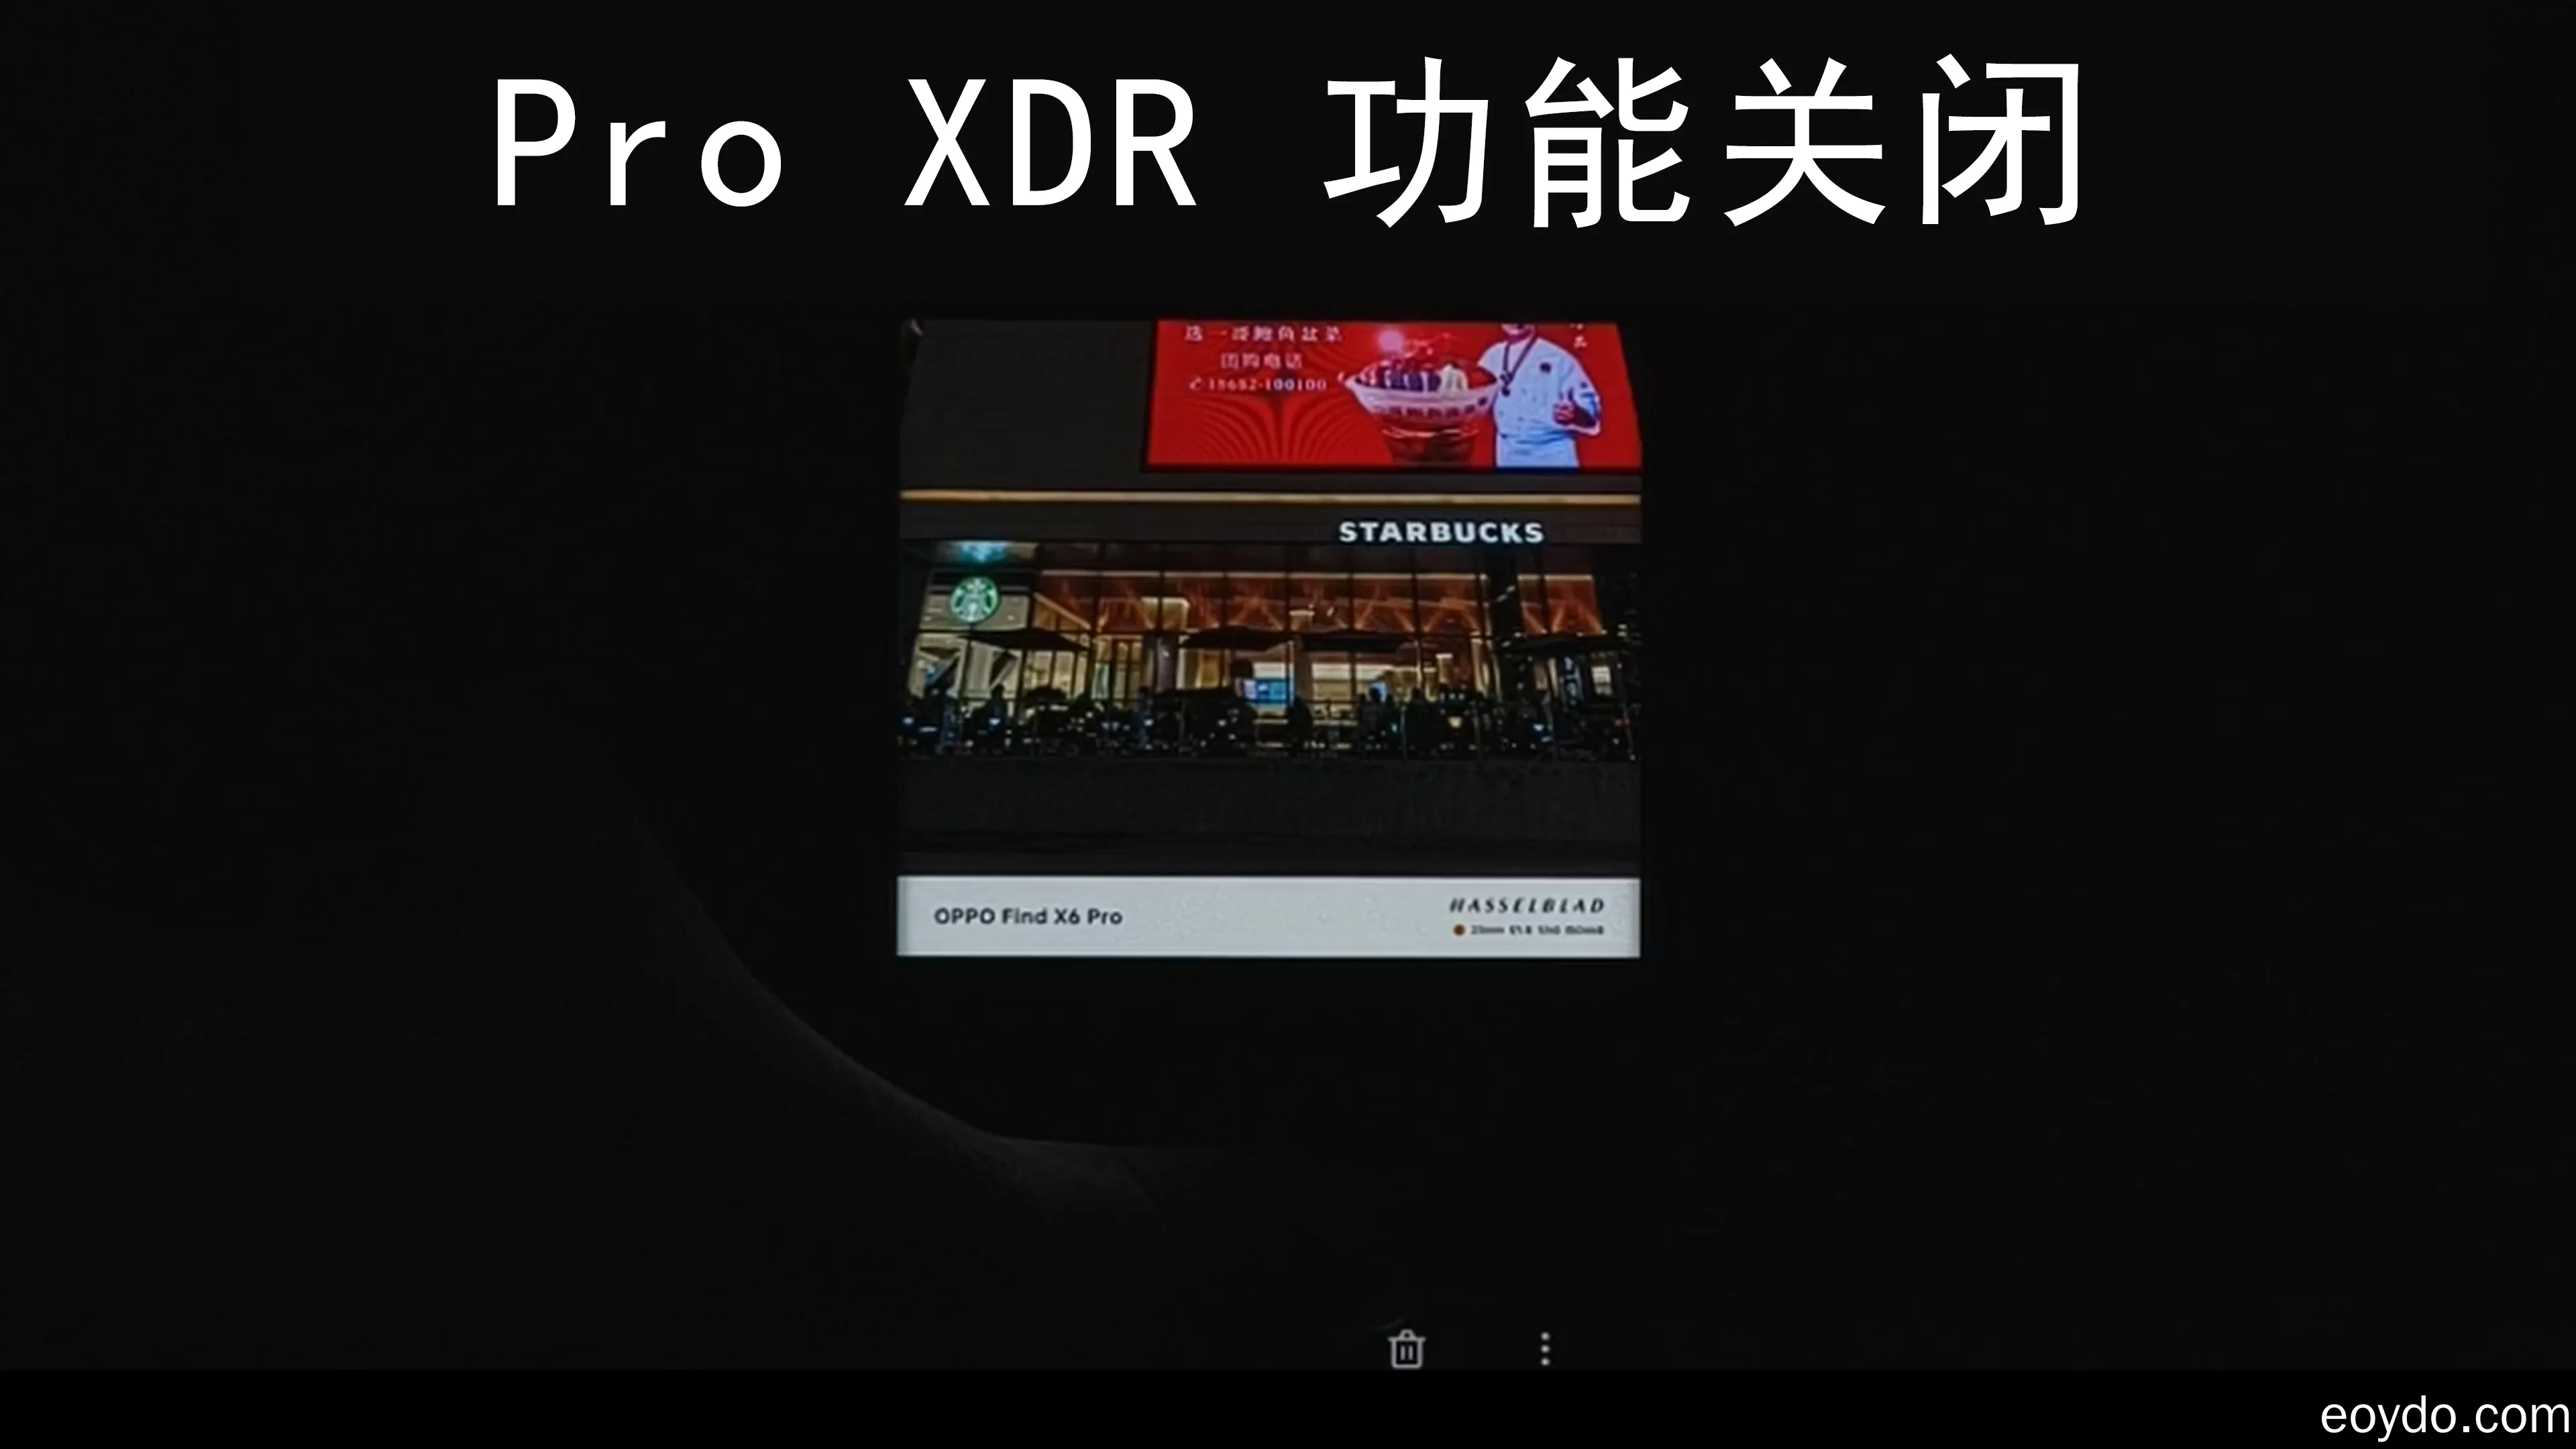 Pro XDR